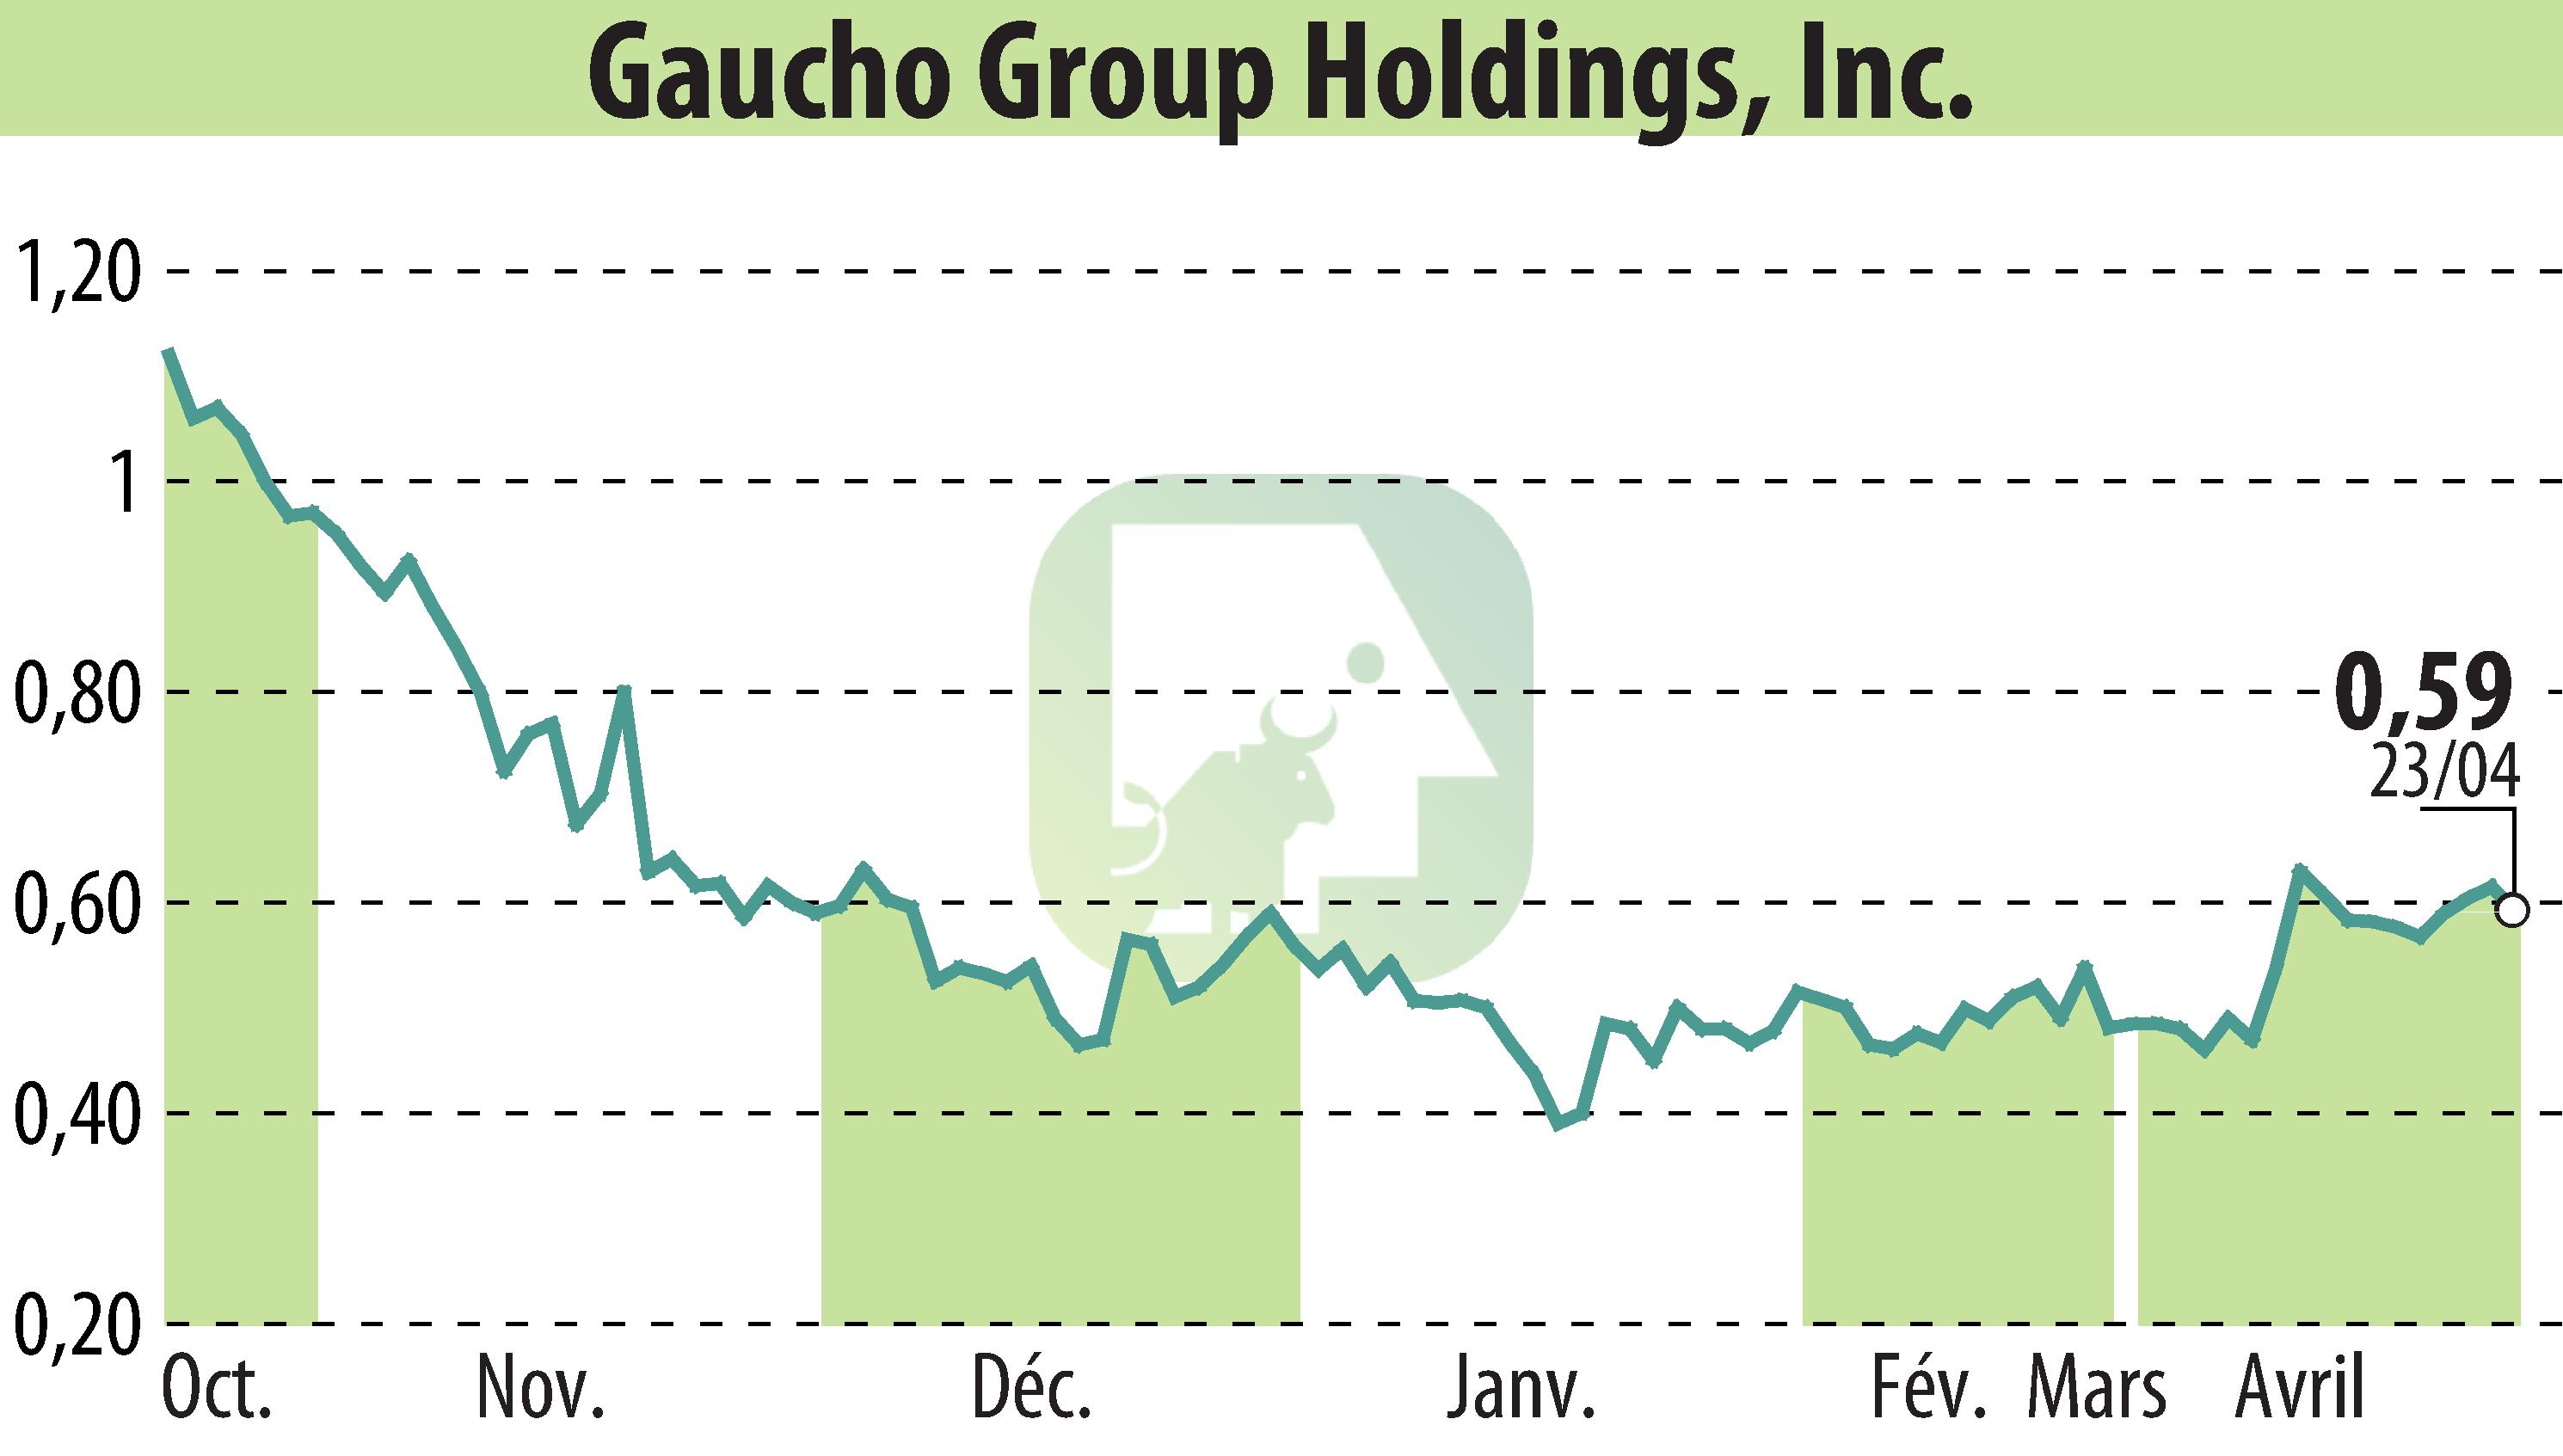 Stock price chart of Gaucho Group Holdings, Inc. (EBR:VINO) showing fluctuations.